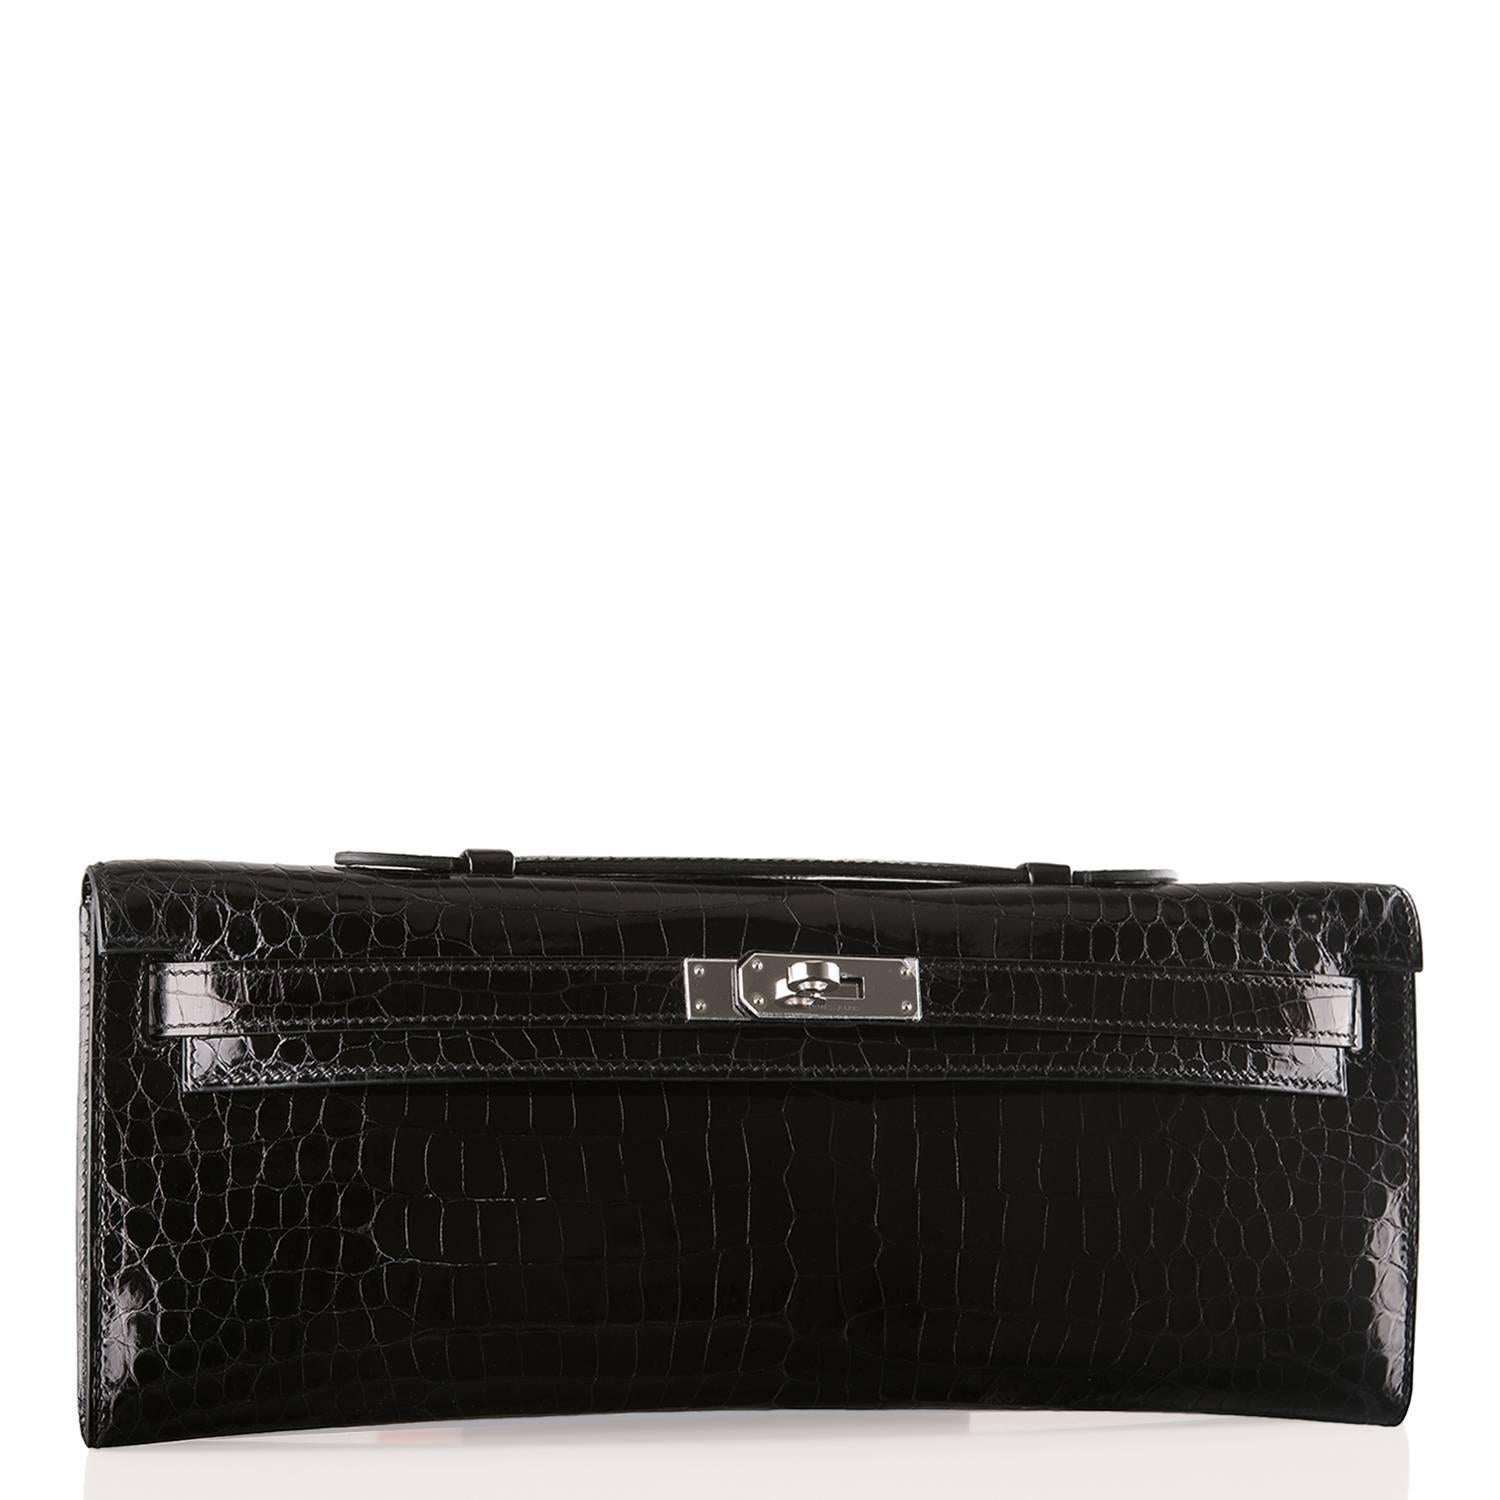 Hermes Black Kelly Cut of shiny porosus crocodile with palladium hardware.

This exotic Kelly Cut has tonal stitching, front straps with a toggle closure and a top flat handle.

The interior is lined with Black chevre leather and has an open